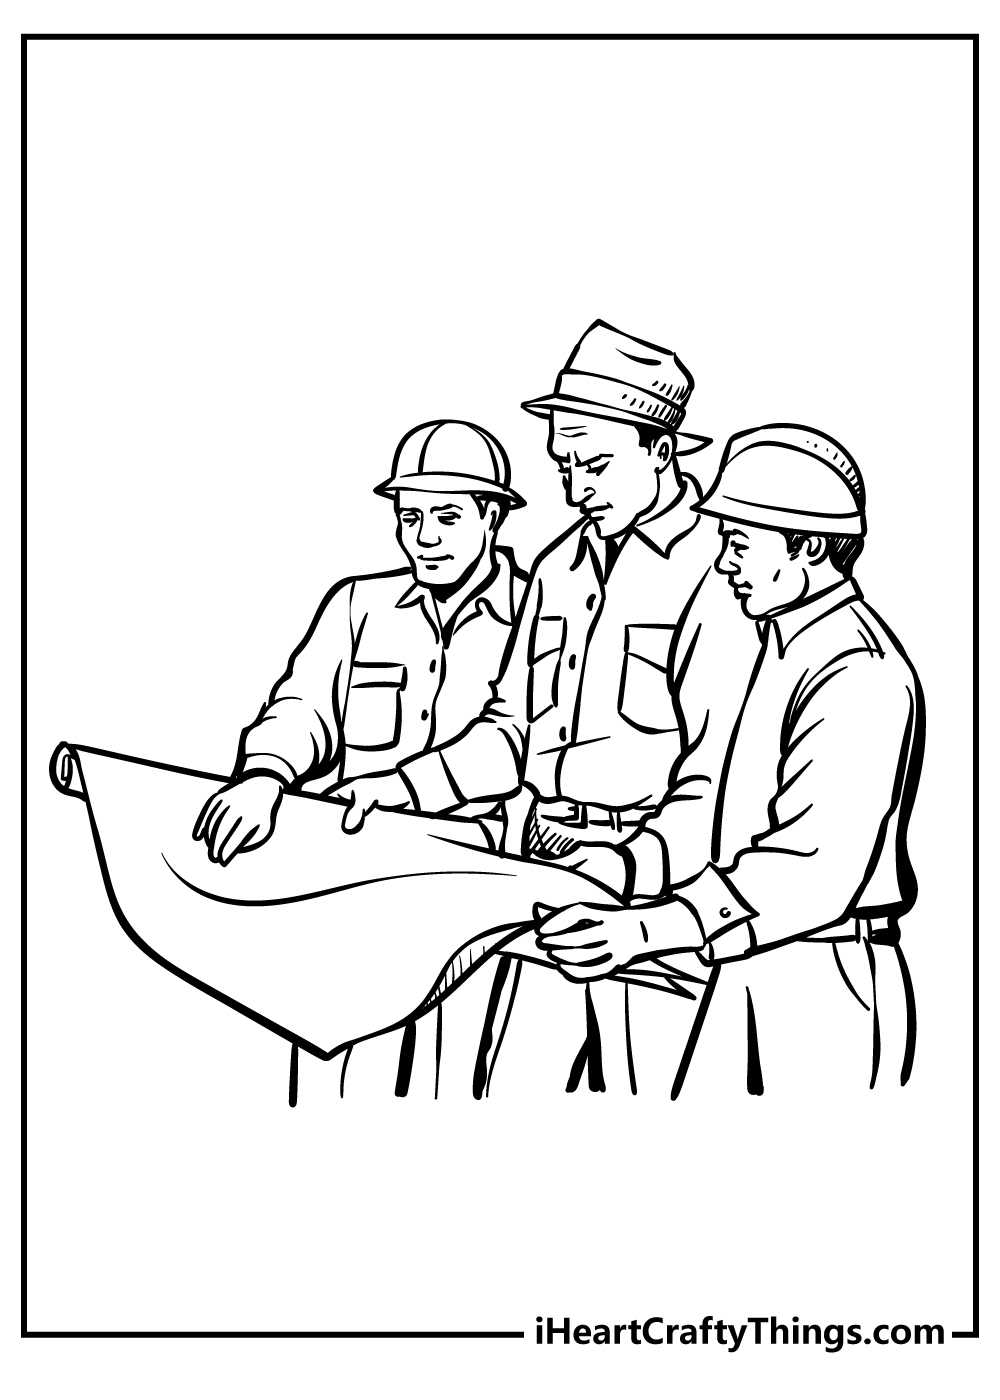 Construction coloring pages free printables